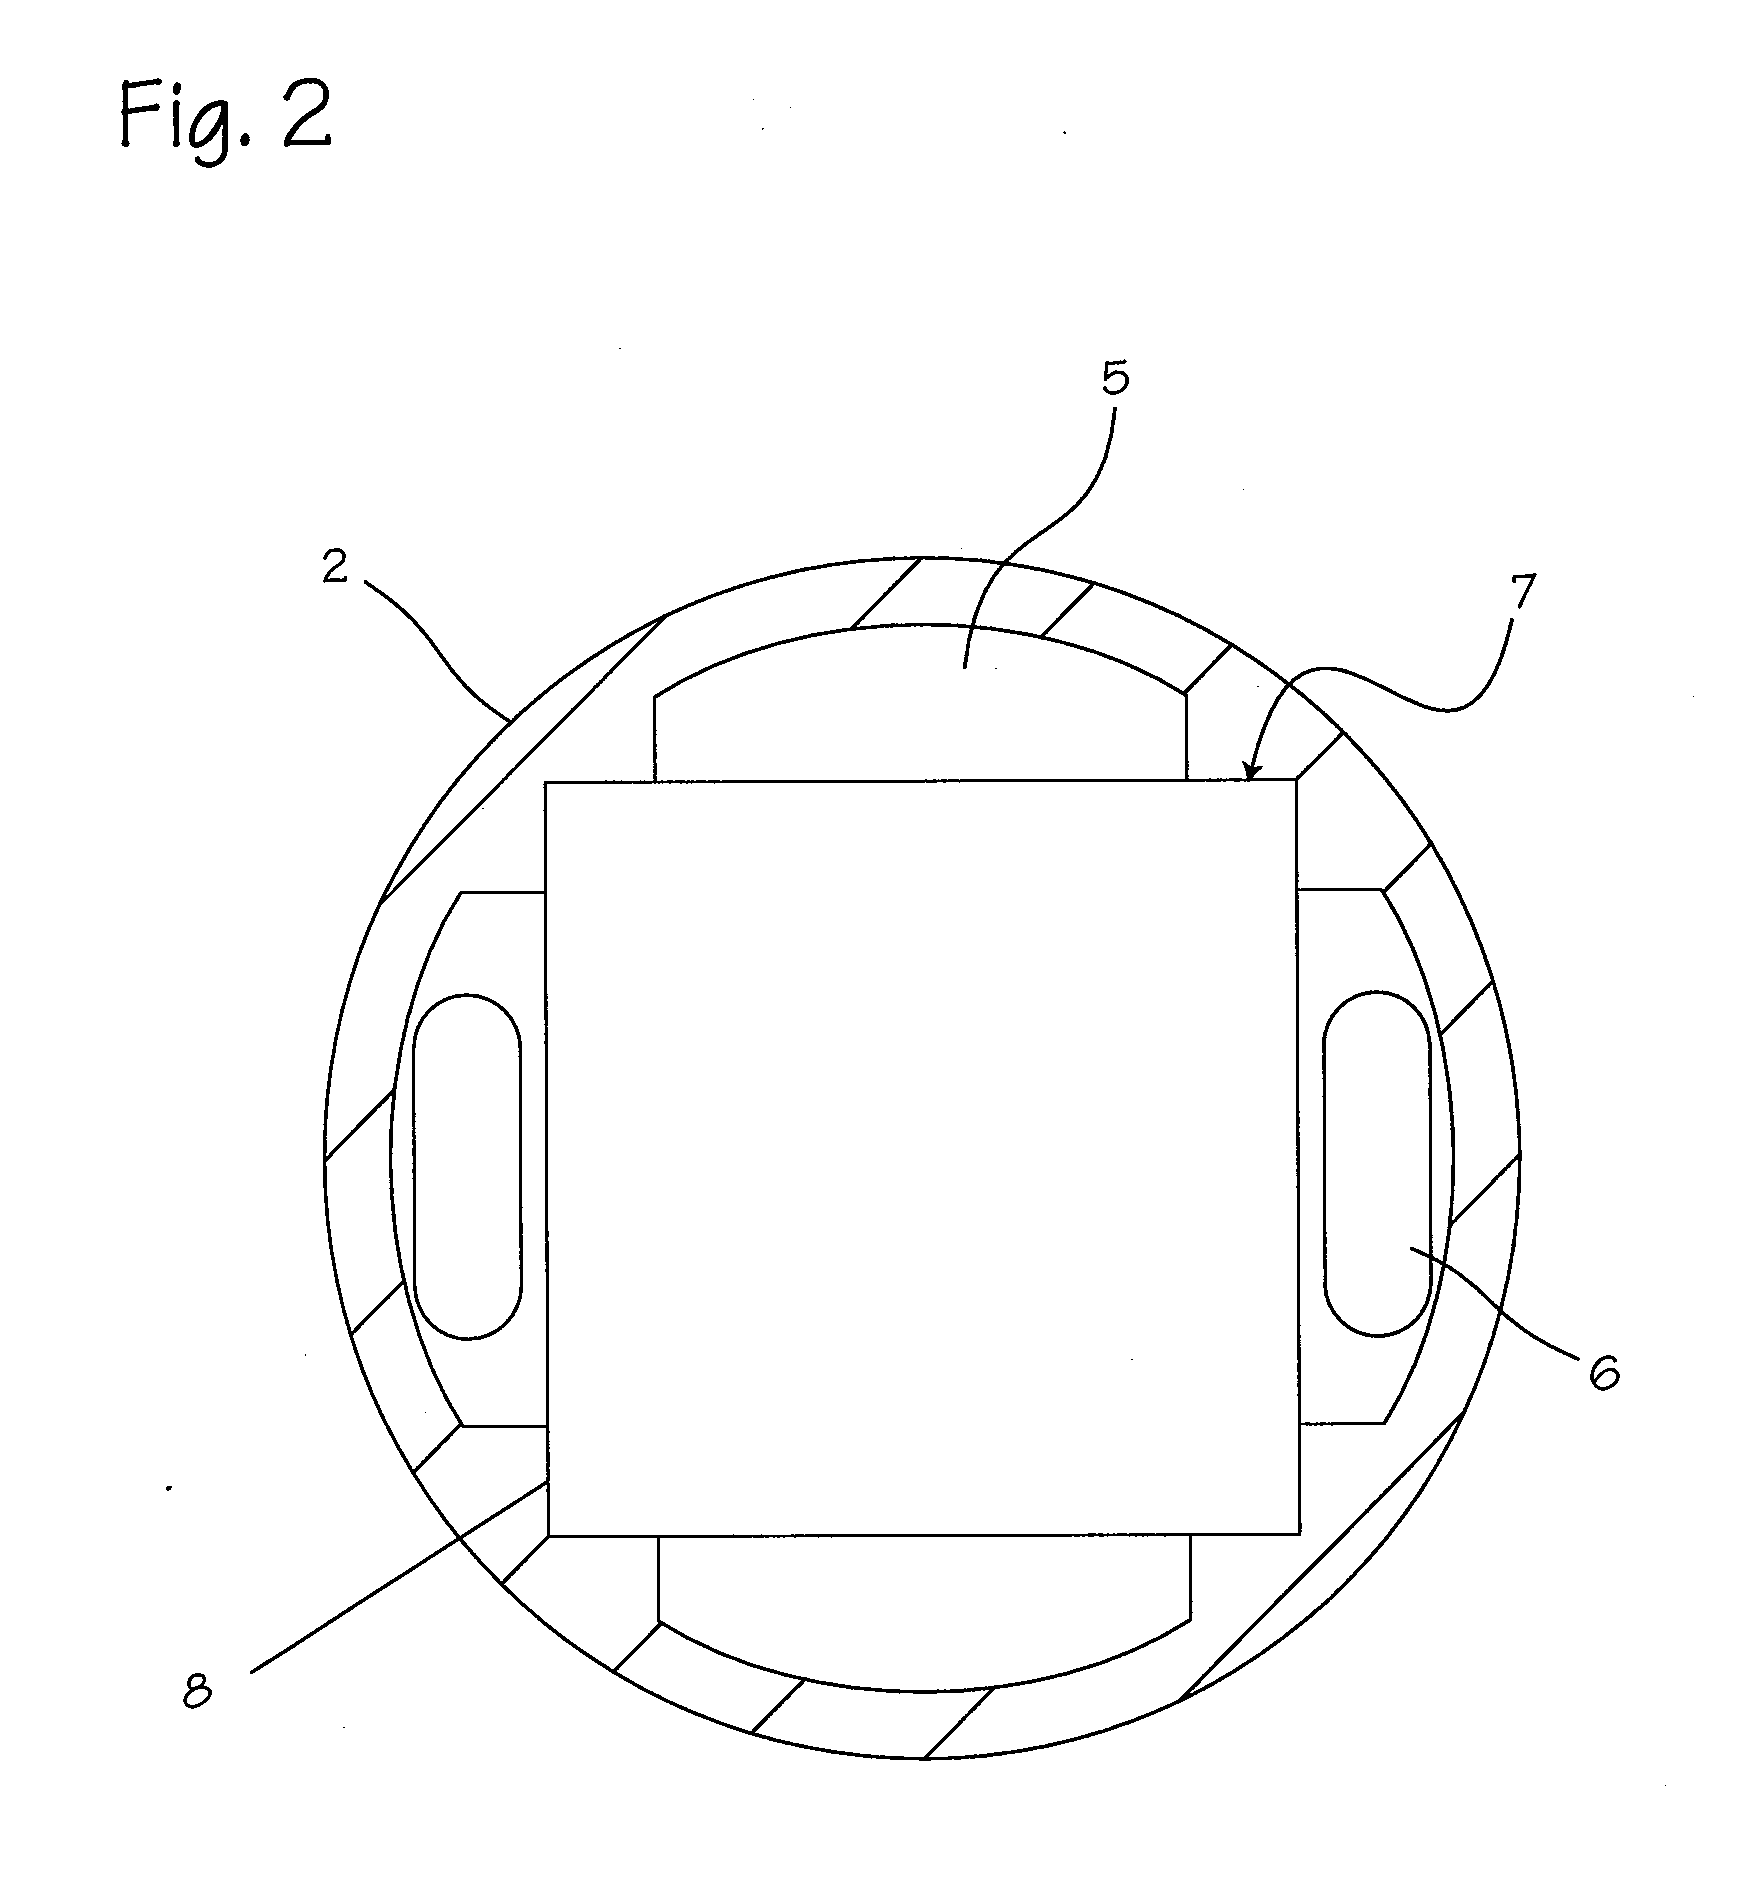 Optical Cap for Use With Arthroscopic System